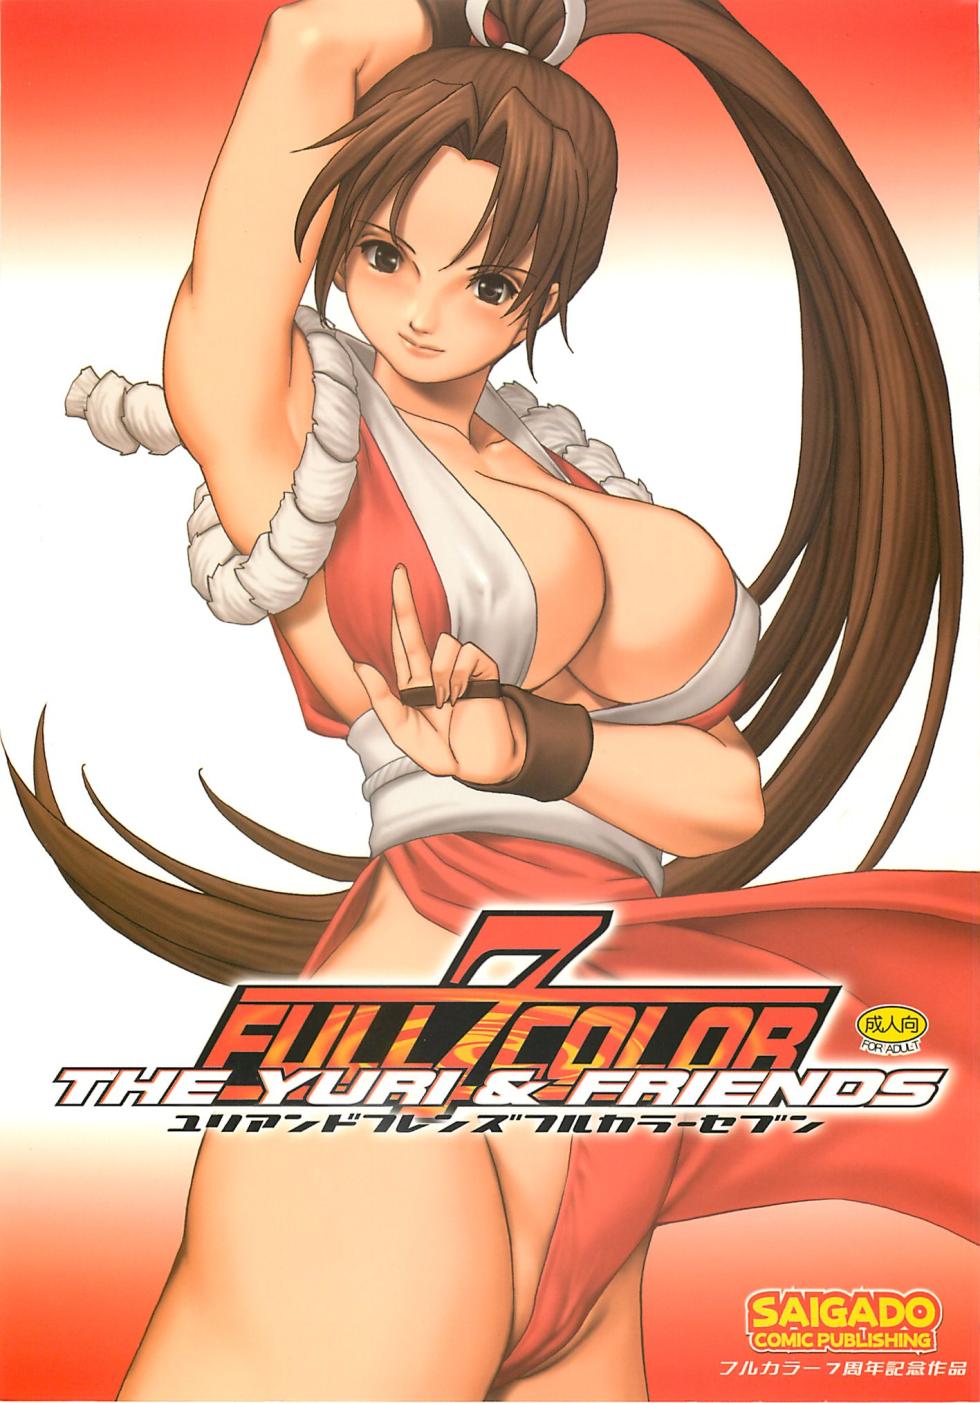 (C66) [Saigado] The Yuri & Friends Full Color 7 (King of Fighters) [Chinese] [Decensored] [無修大濕] - Page 1